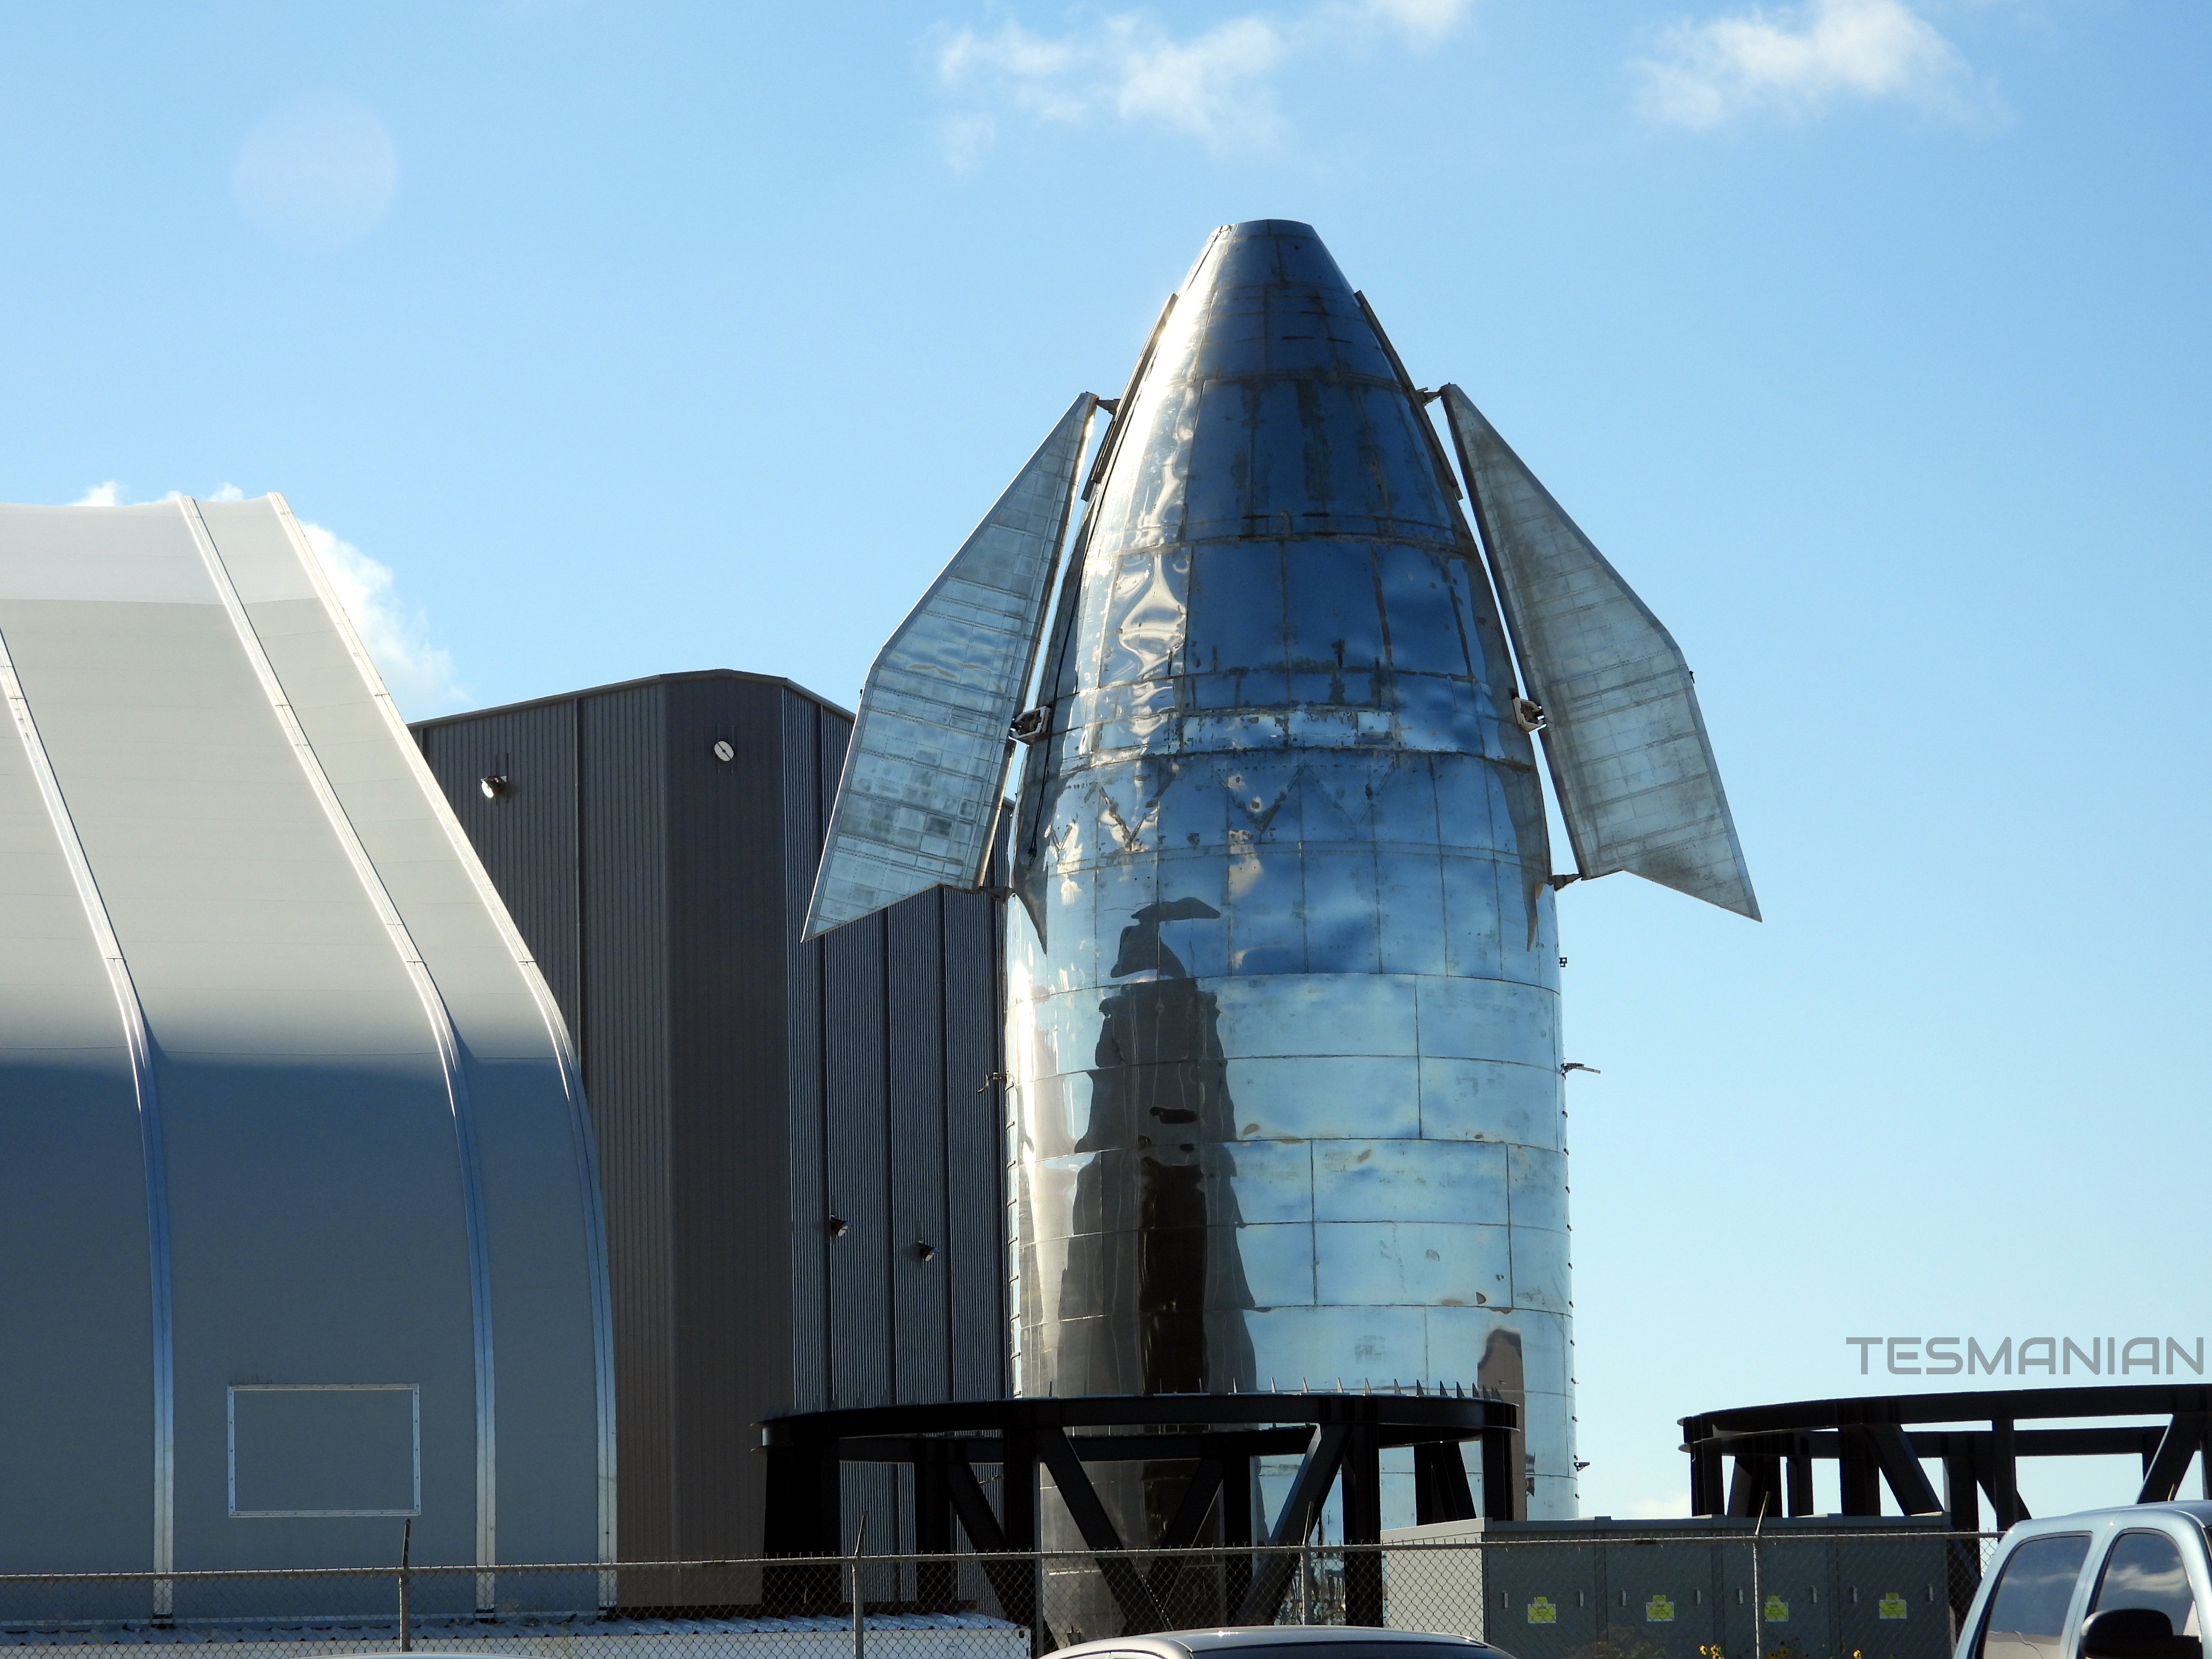 SpaceX asks employees to consider working in Texas –Top priority is now Starship development